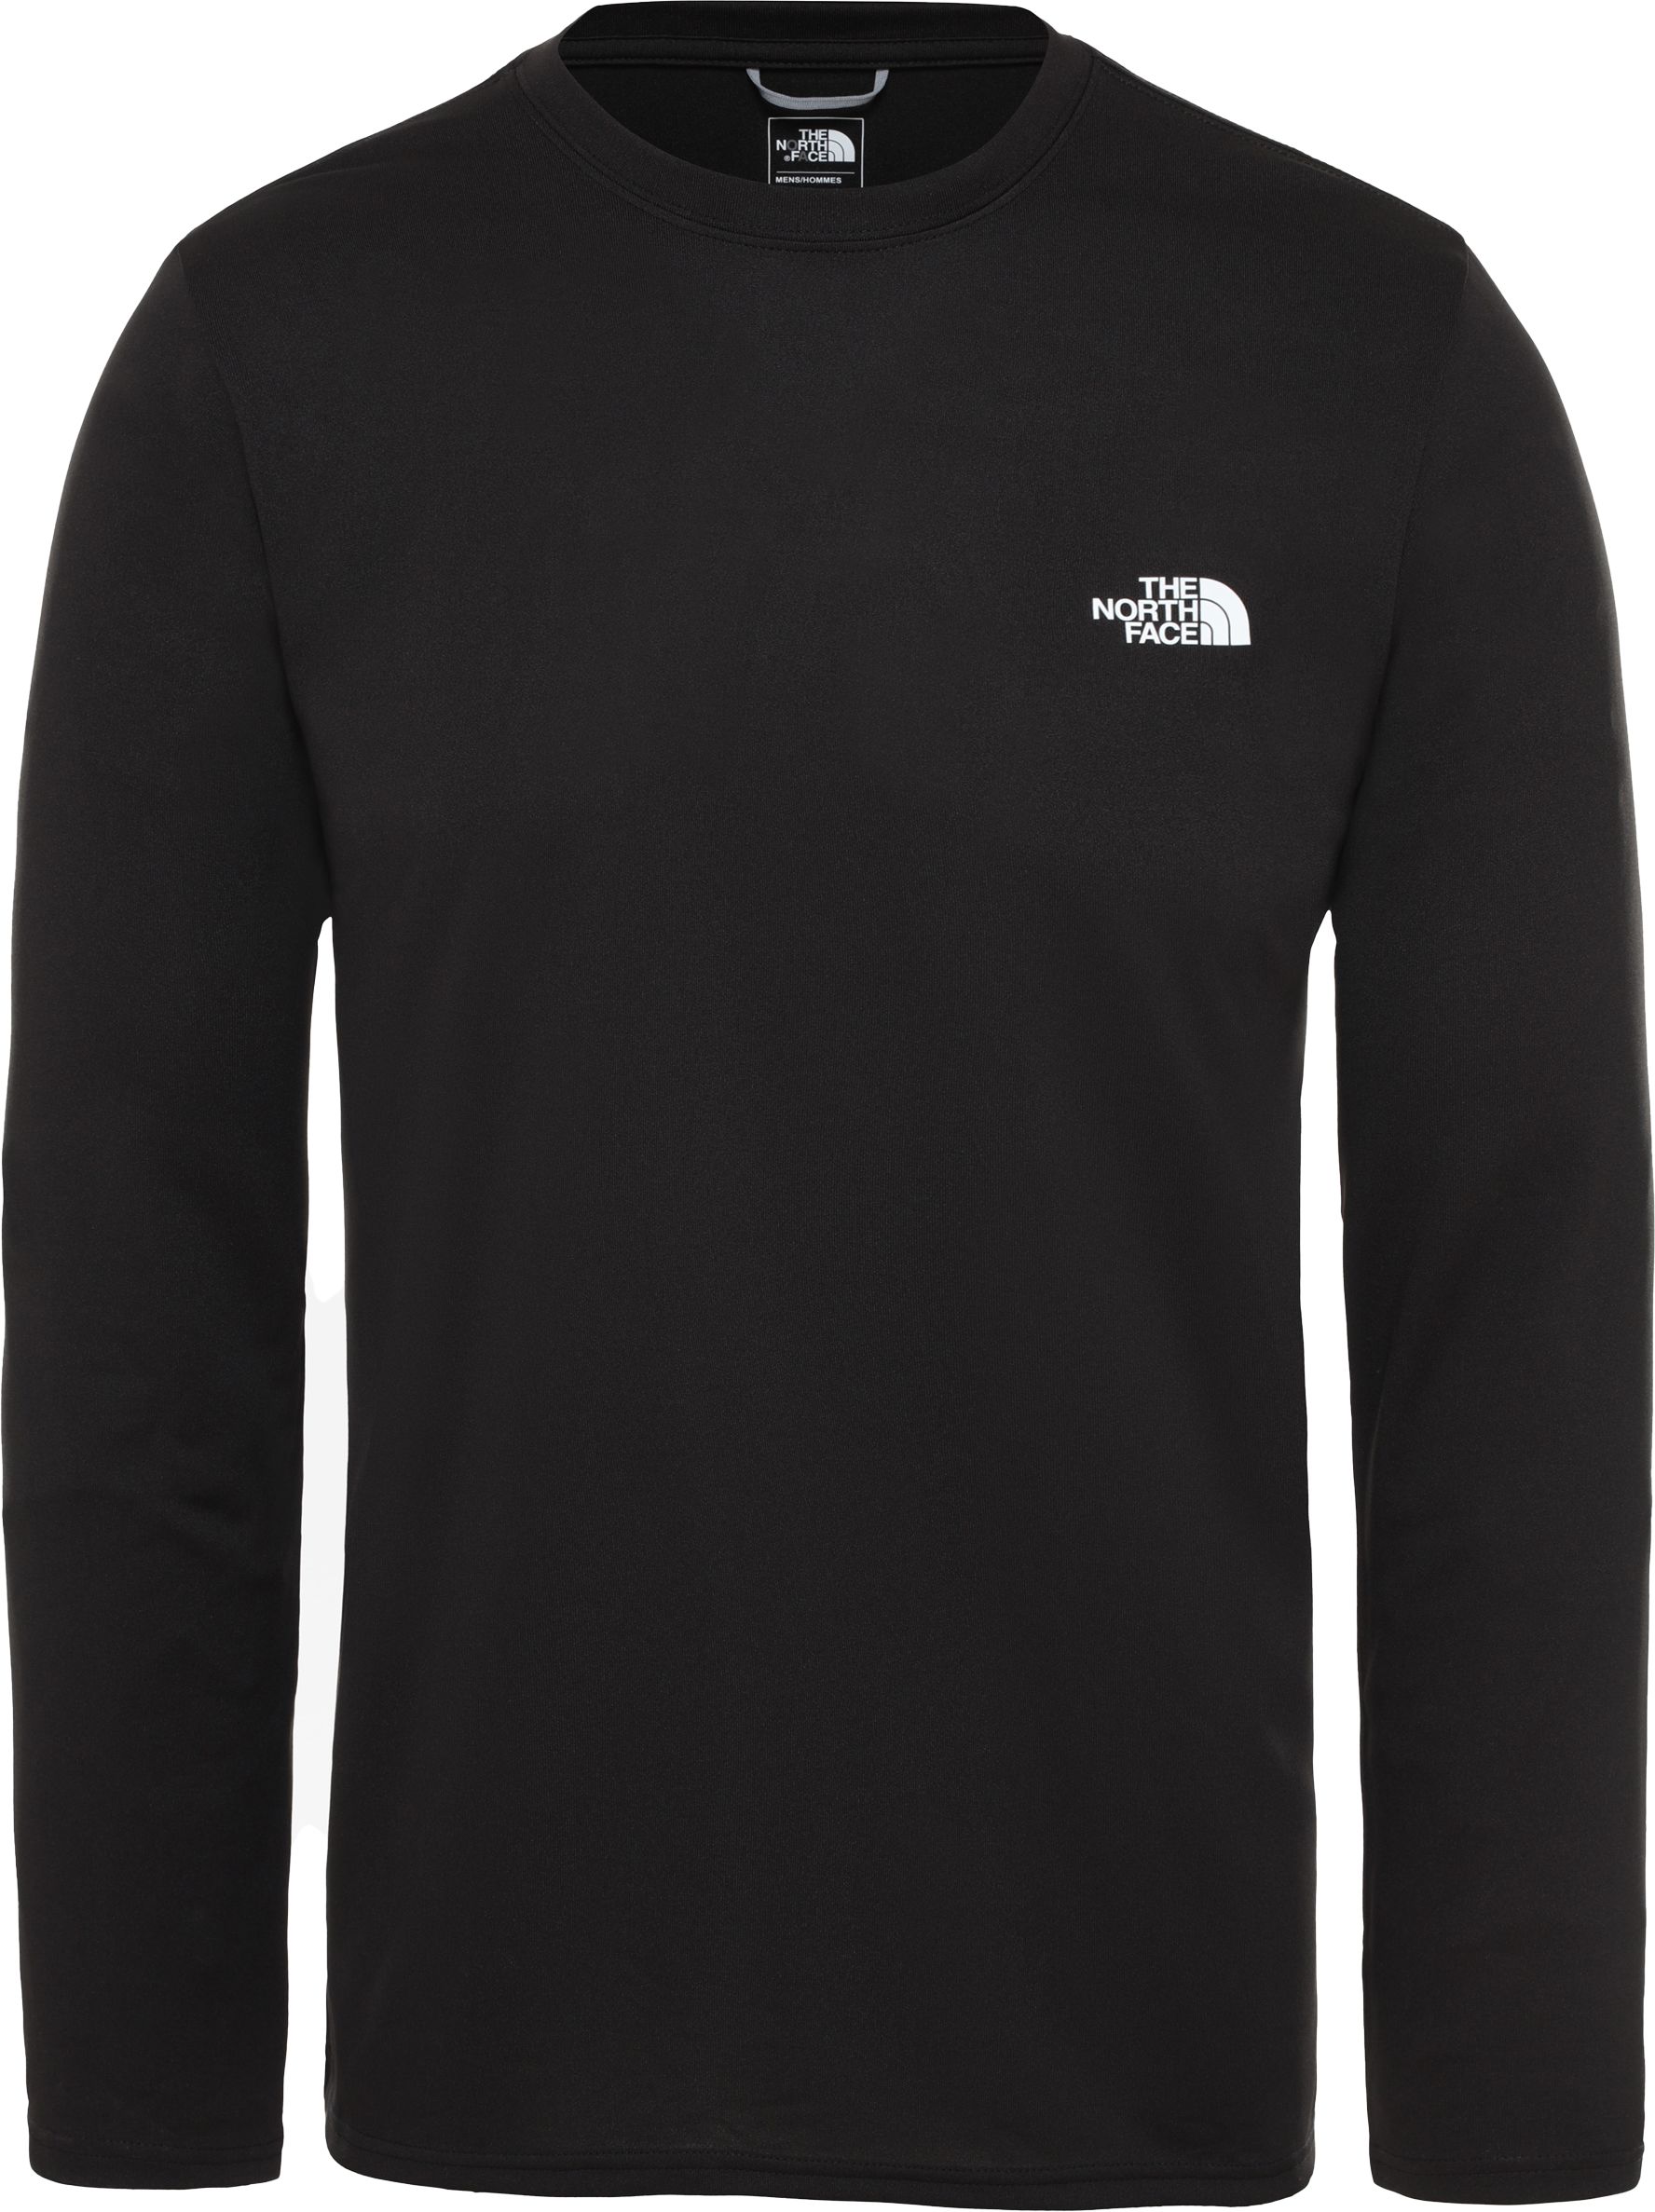 THE NORTH FACE, M REAXION L/S